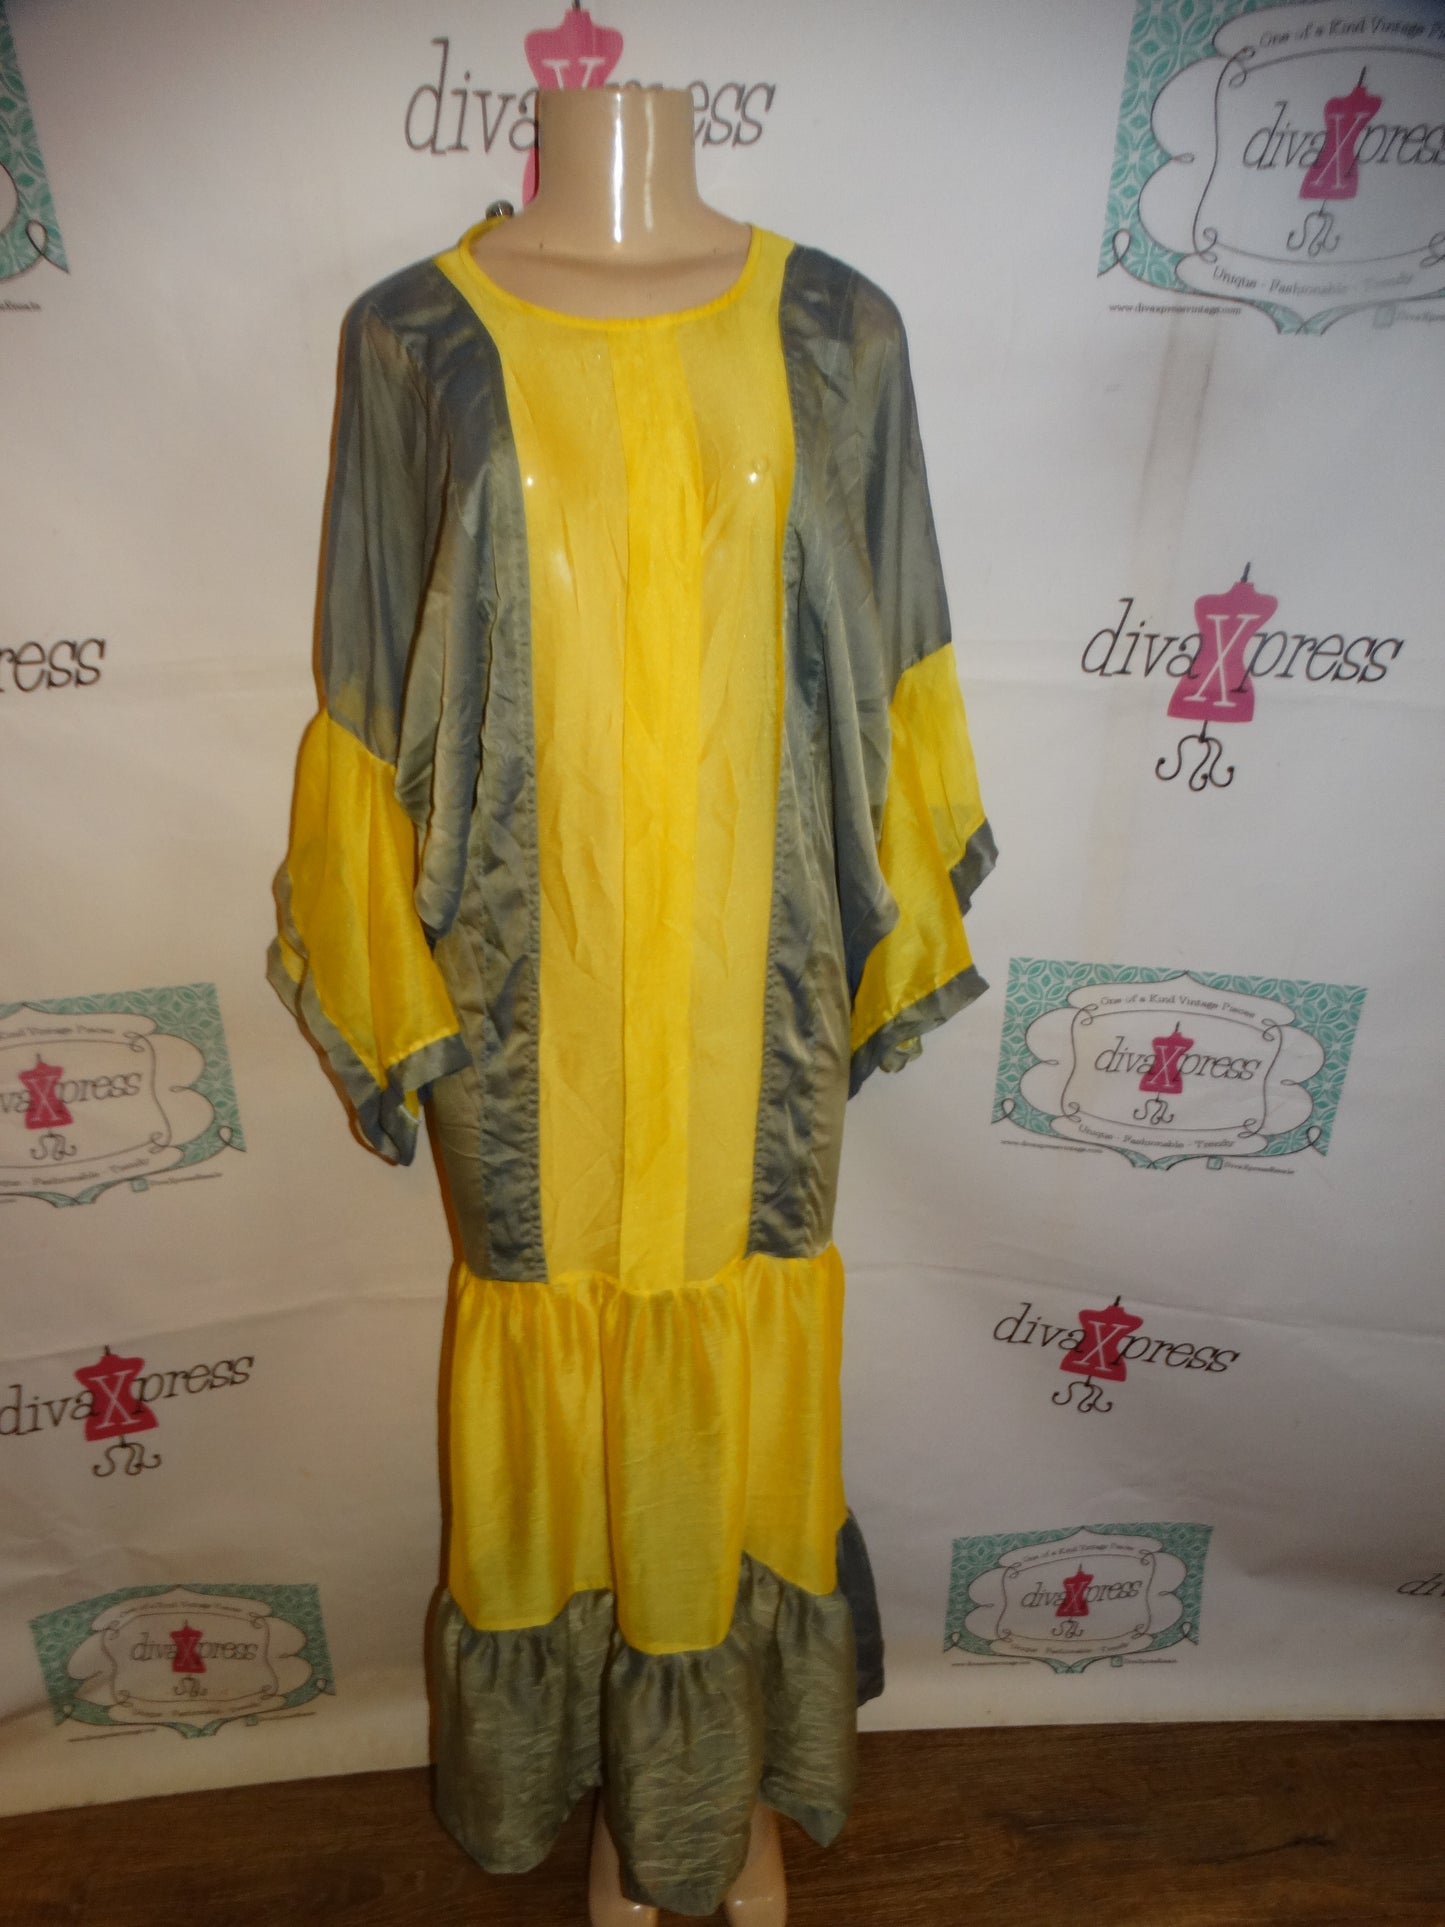 Vintage Yellow/Gray Sheer Dress/Coverup Size M